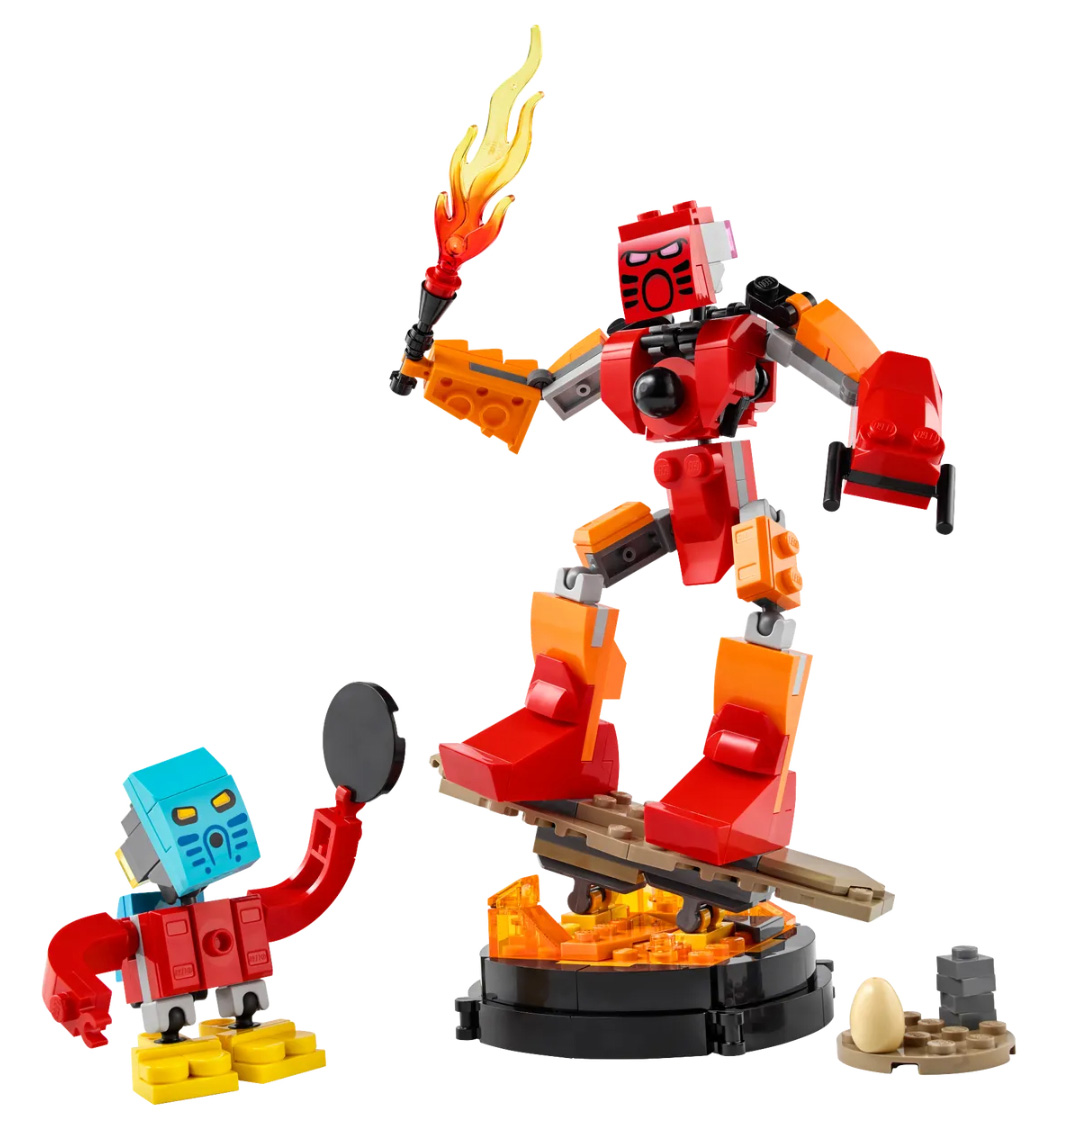 40581 BIONICLE Tahu and Takua LEGO (R)GWP Officially Revealed | Expected to be available from January 27, 2023